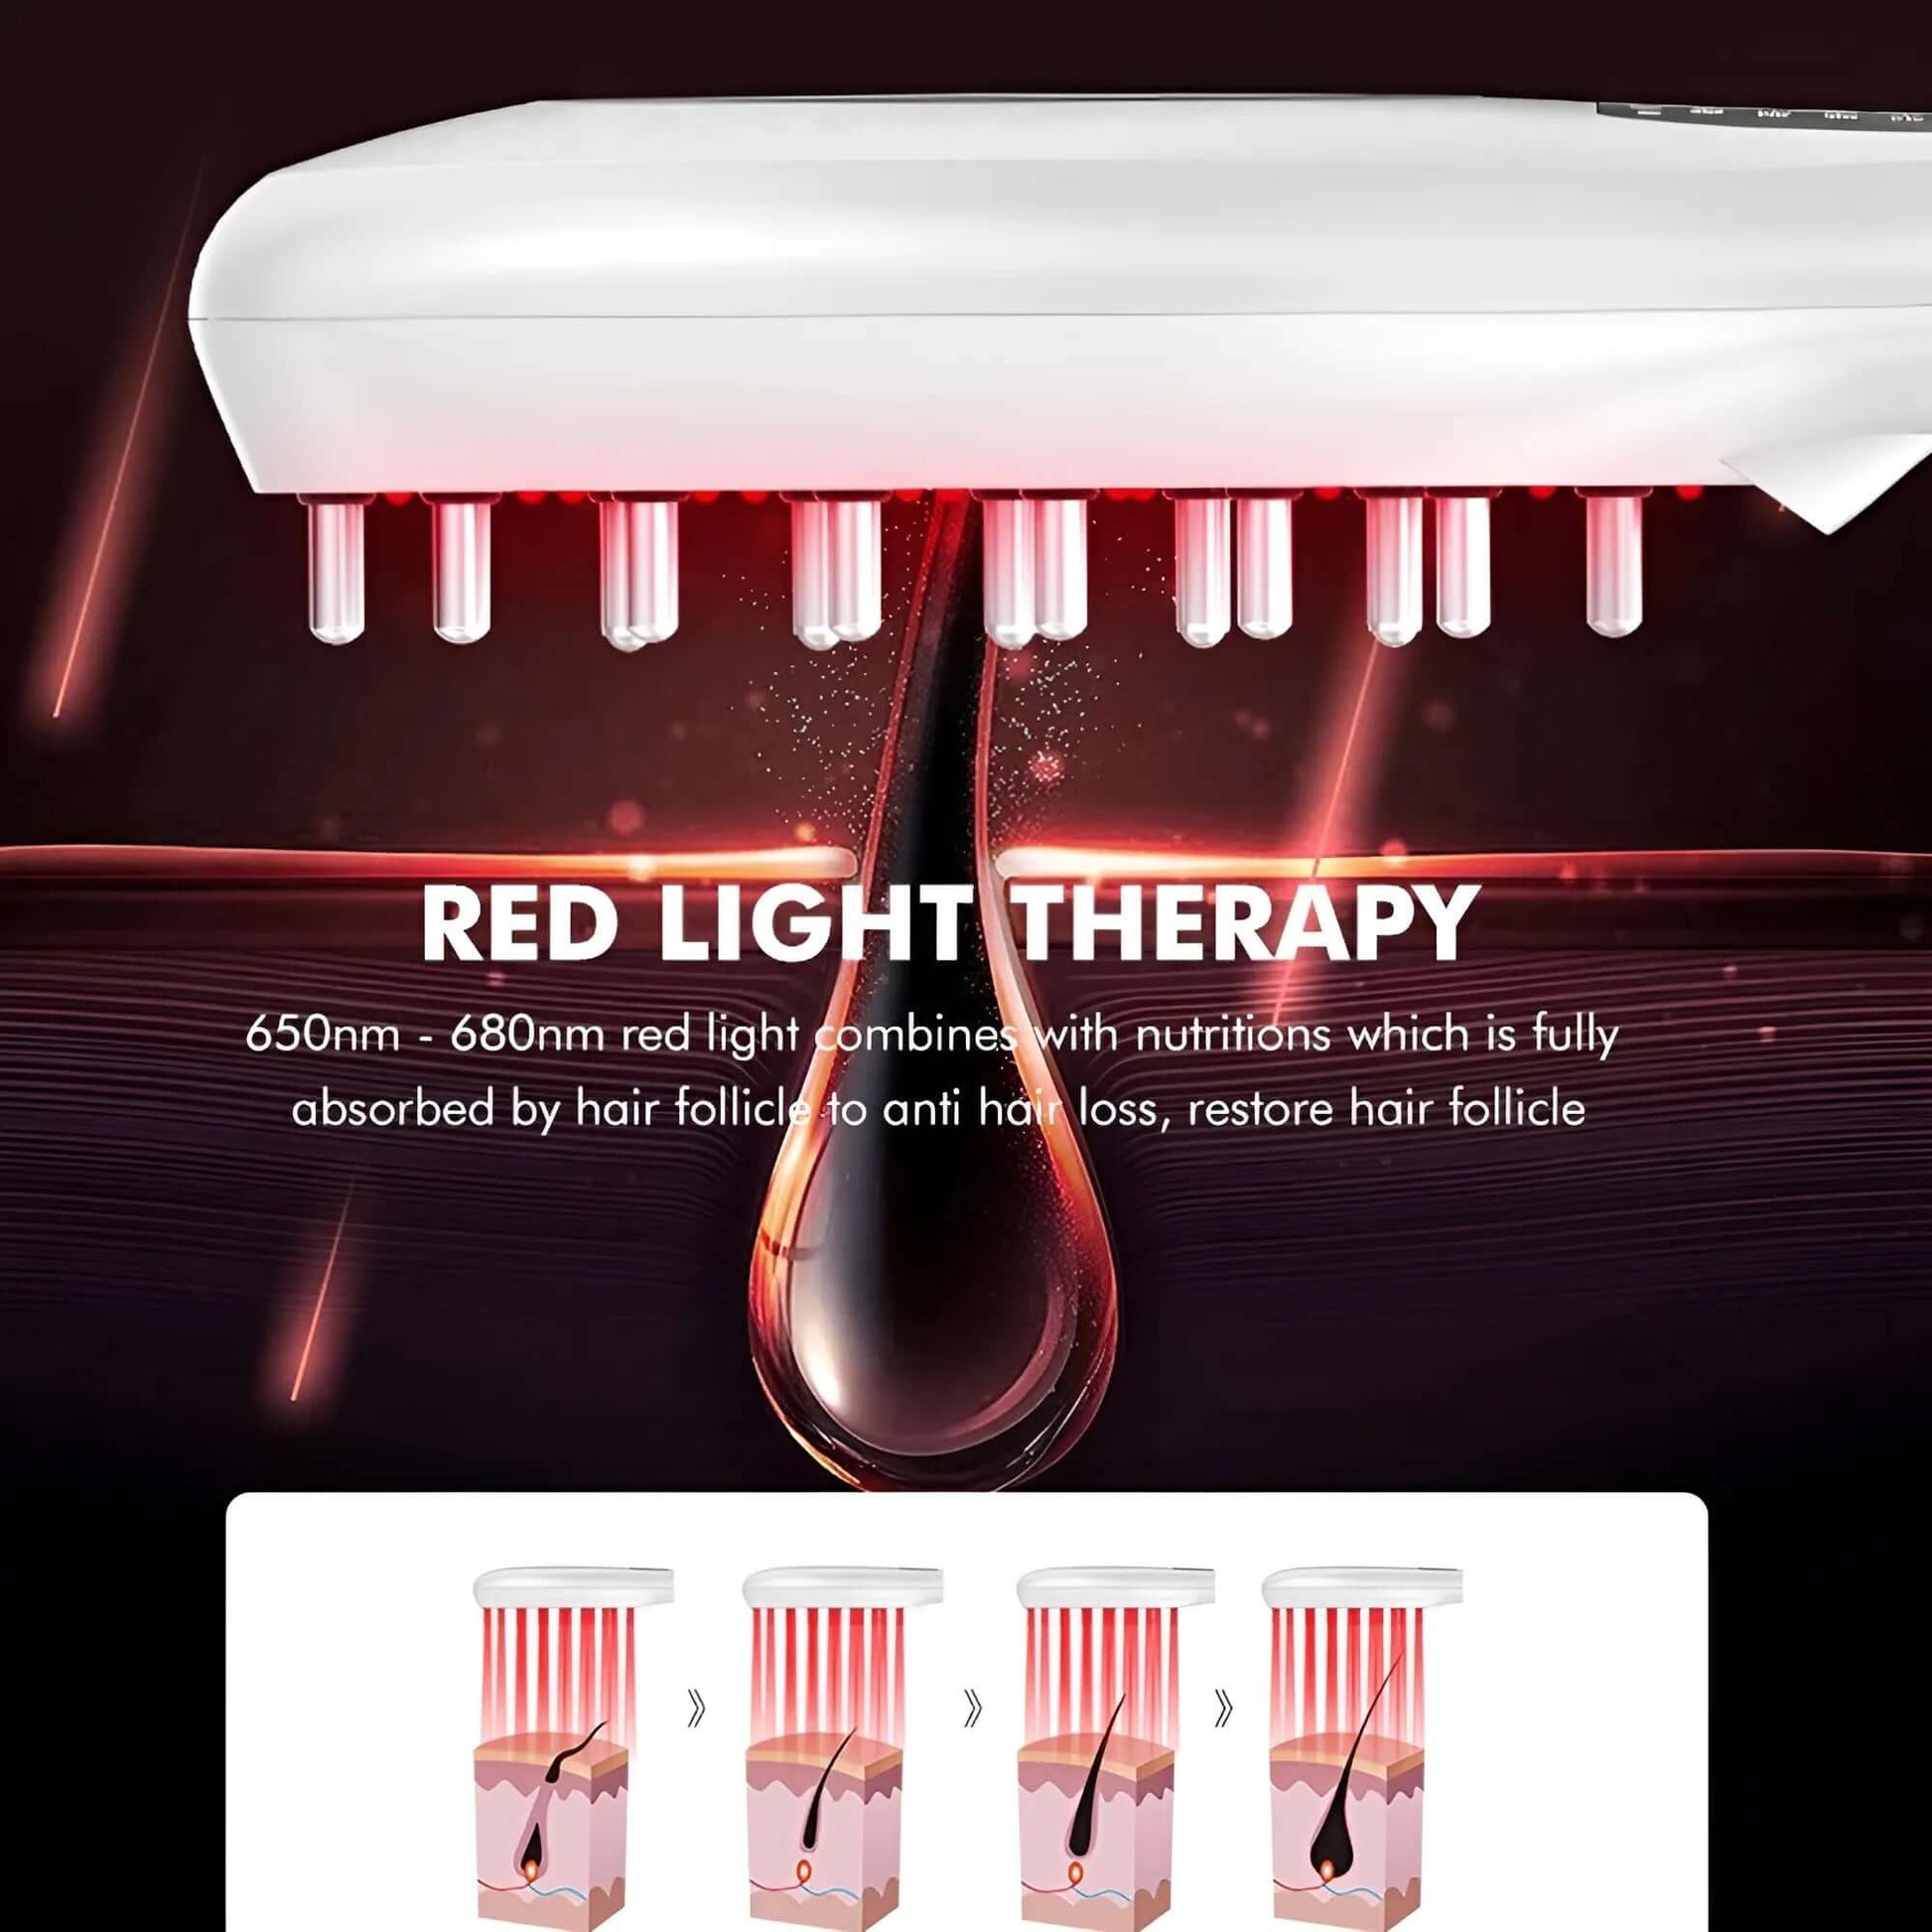 New light therapy hair growth device that works! Scientifically proven hair loss treatment